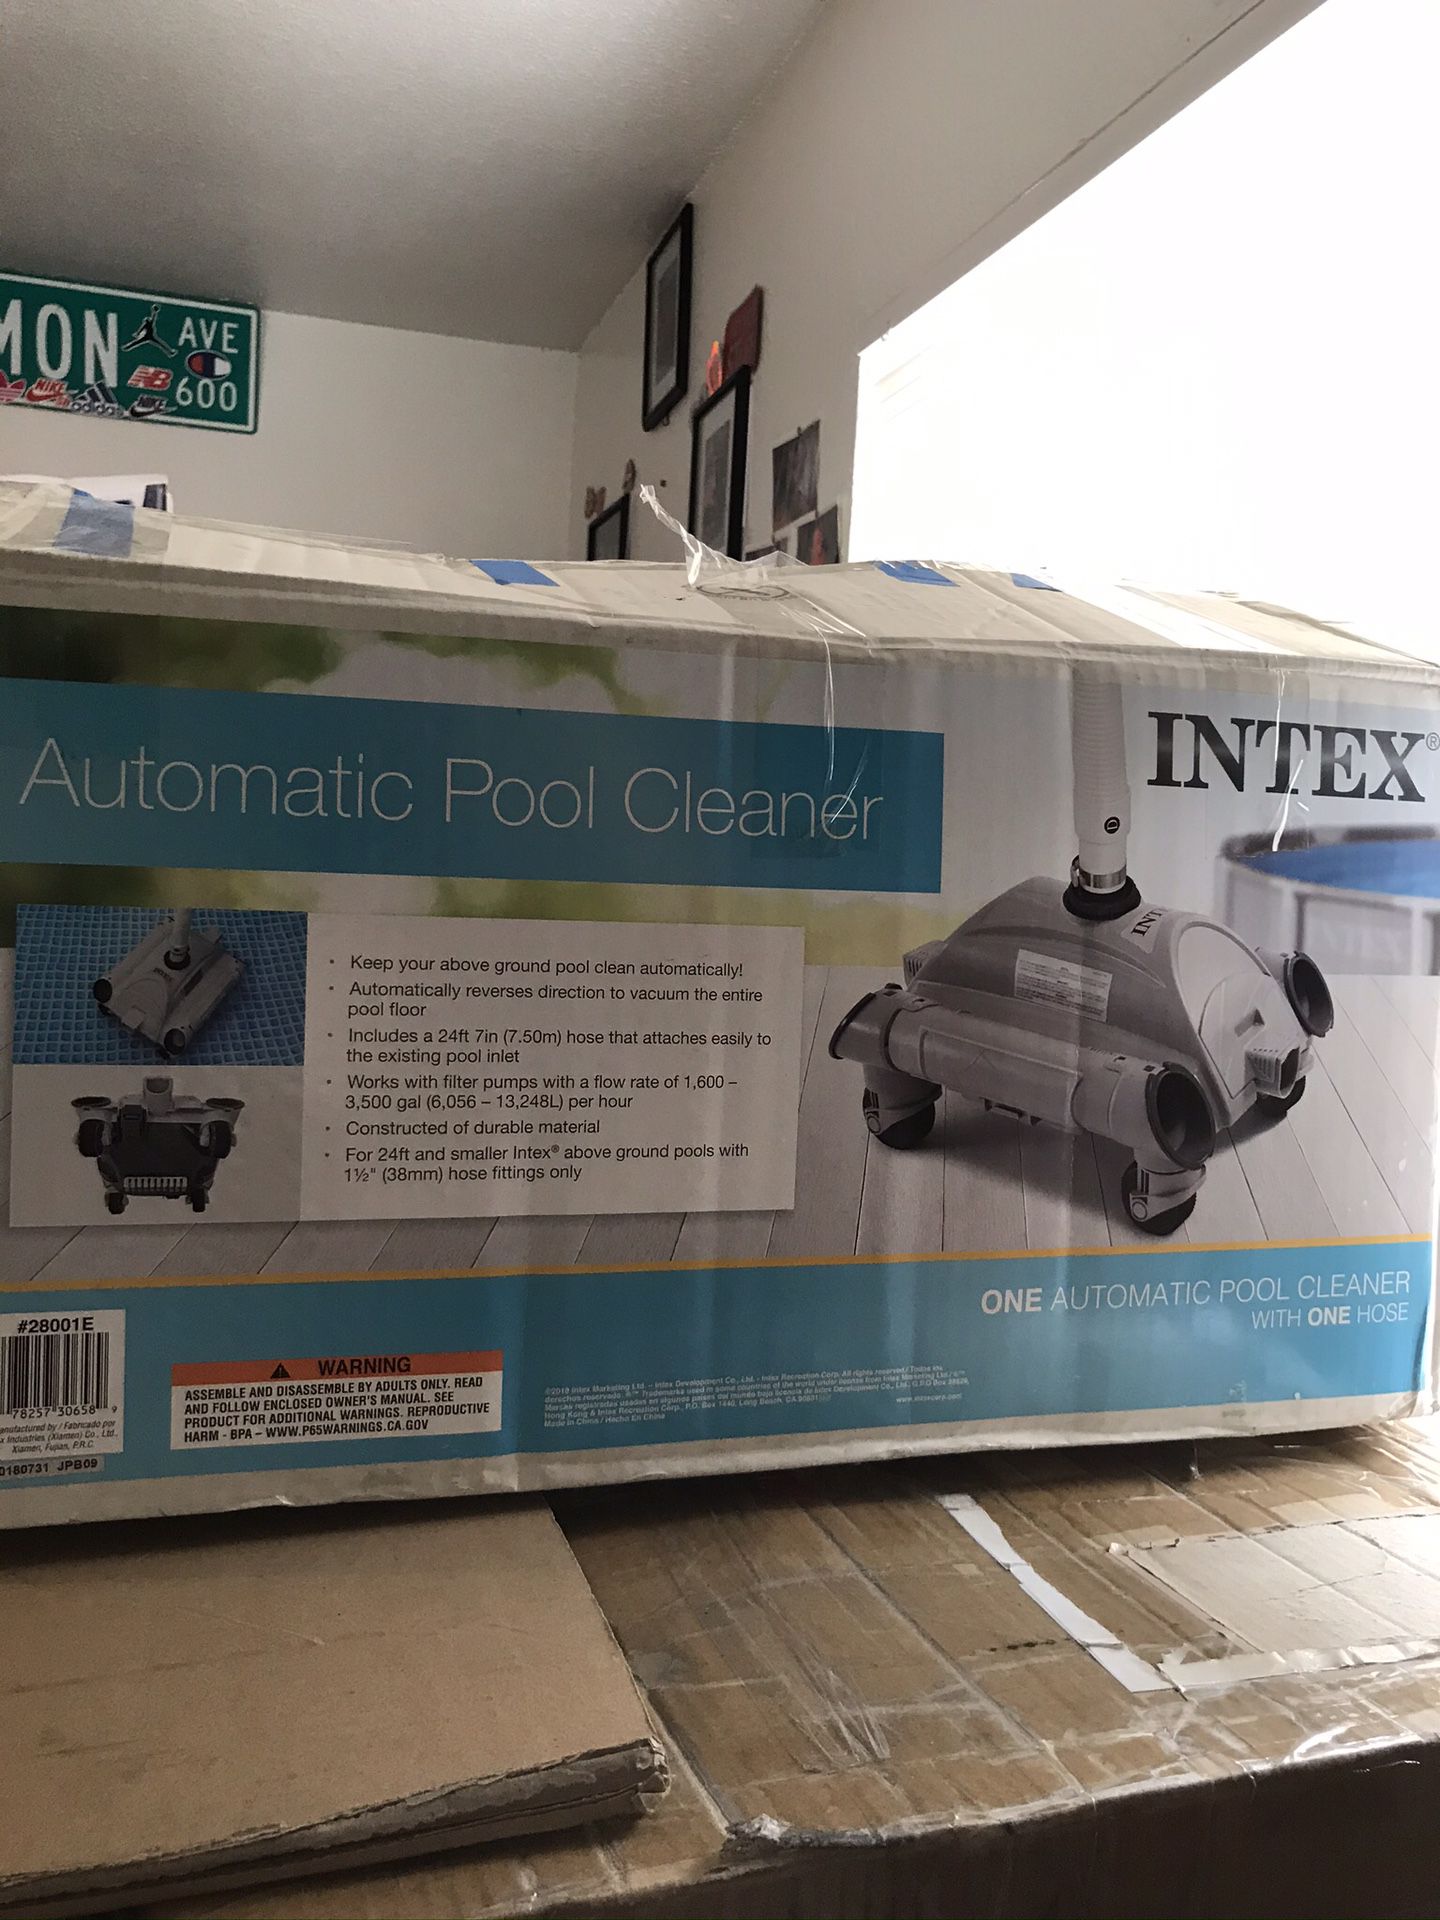 Automatic pool cleaner